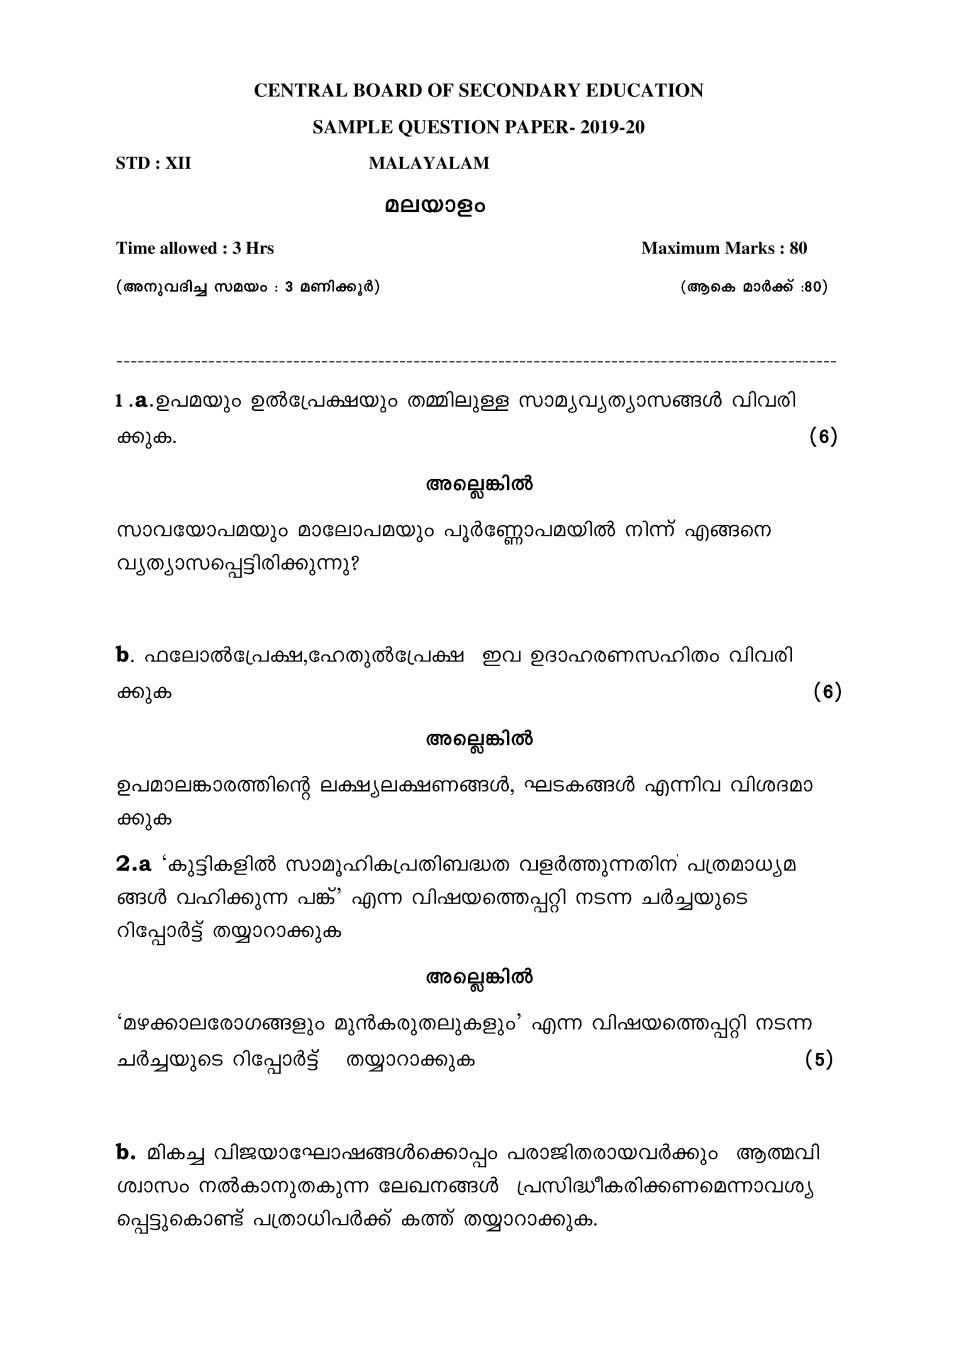 CBSE Class 12 Sample Paper 2020 for Malayalam - Page 1